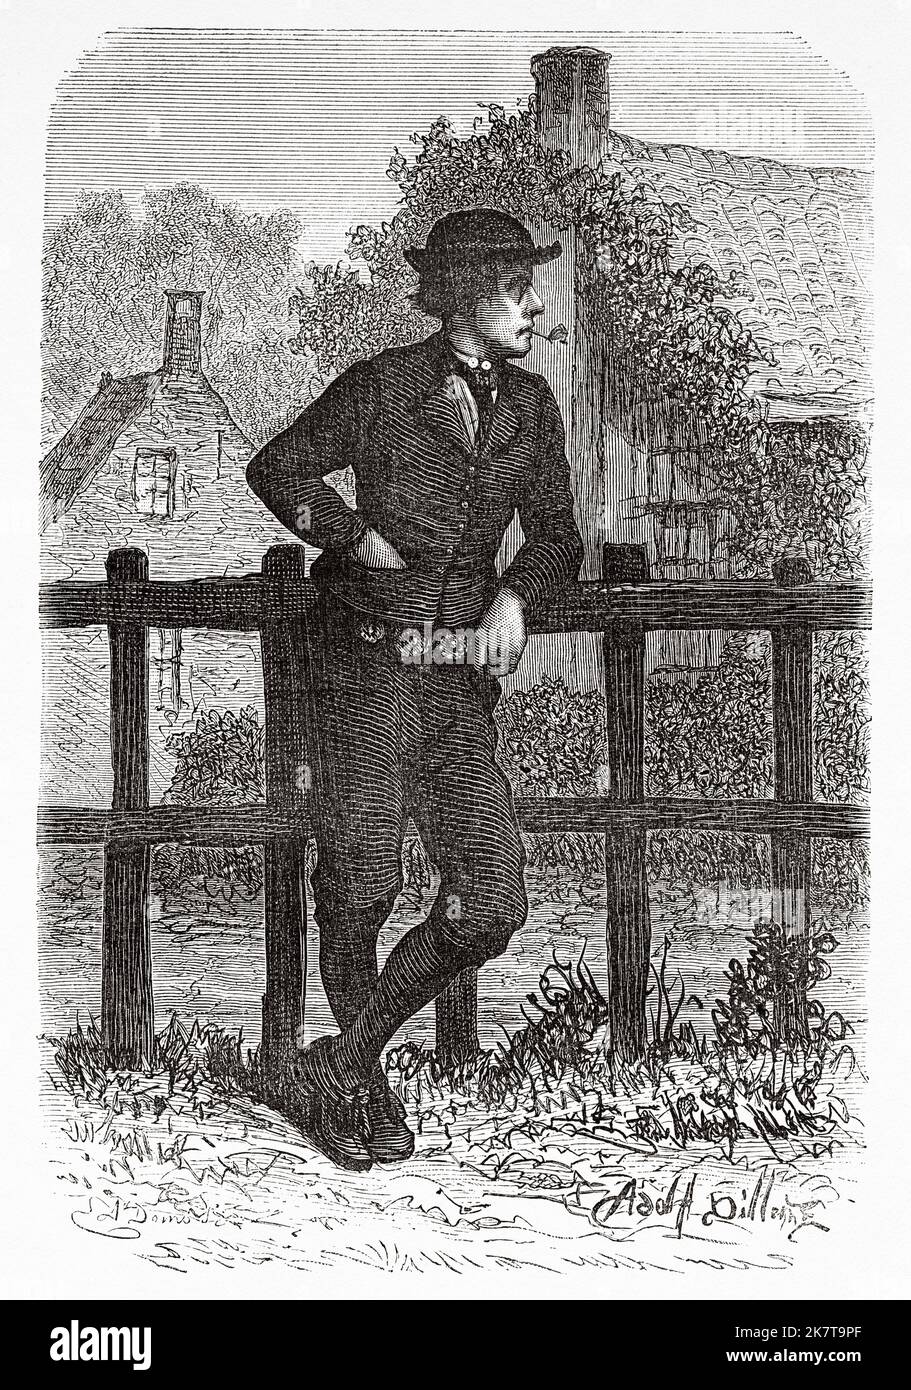 Farmer from Goes, Netherlands, Europe. Trip to the Zeeland by Charles De Coster 1873 Stock Photo